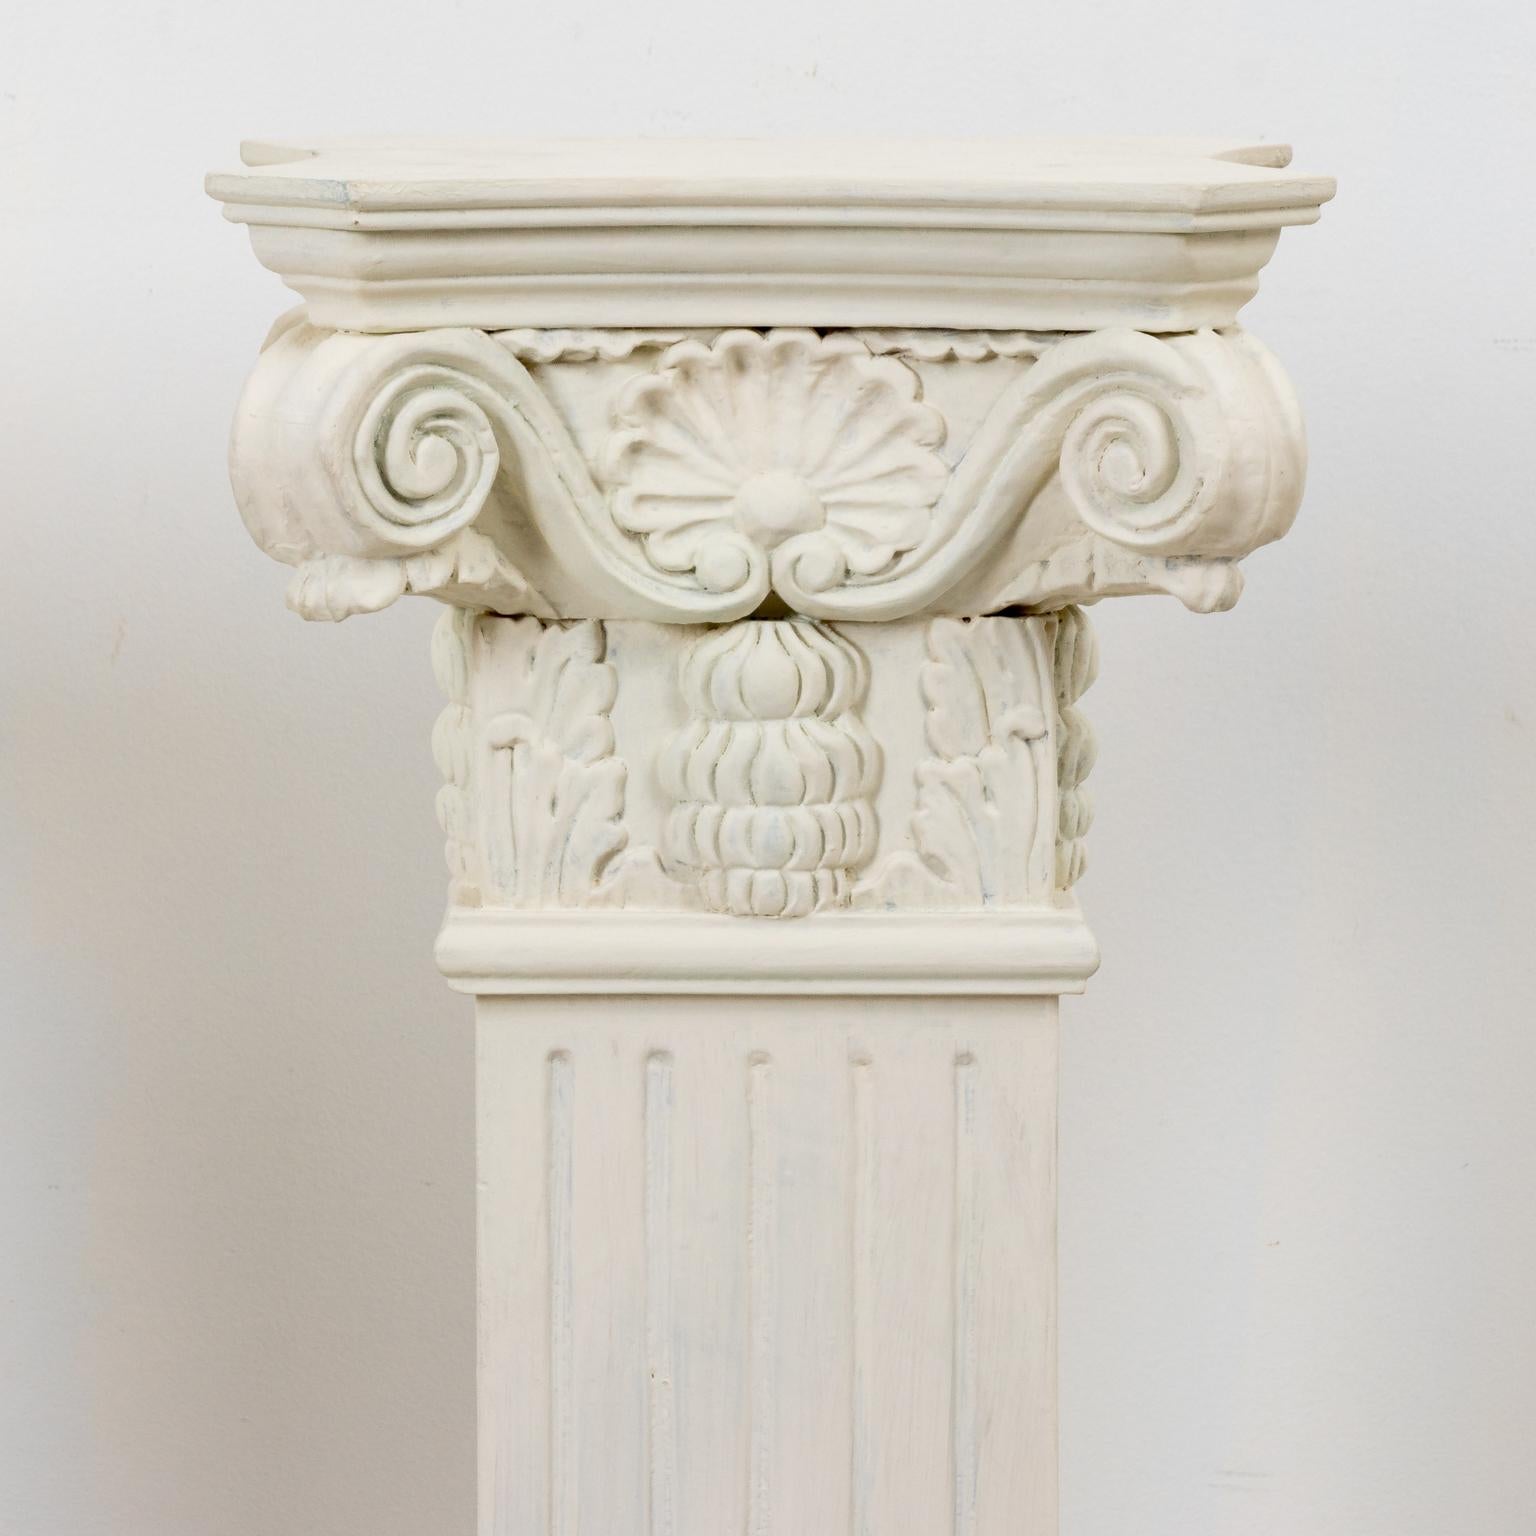 Pair of vintage white painted neoclassical style wooden carved pedestals with composite capitals, circa mid-20th century. The capitals are carved with scrollwork and floral detail along with a fluted column base. Please note of wear consistent with